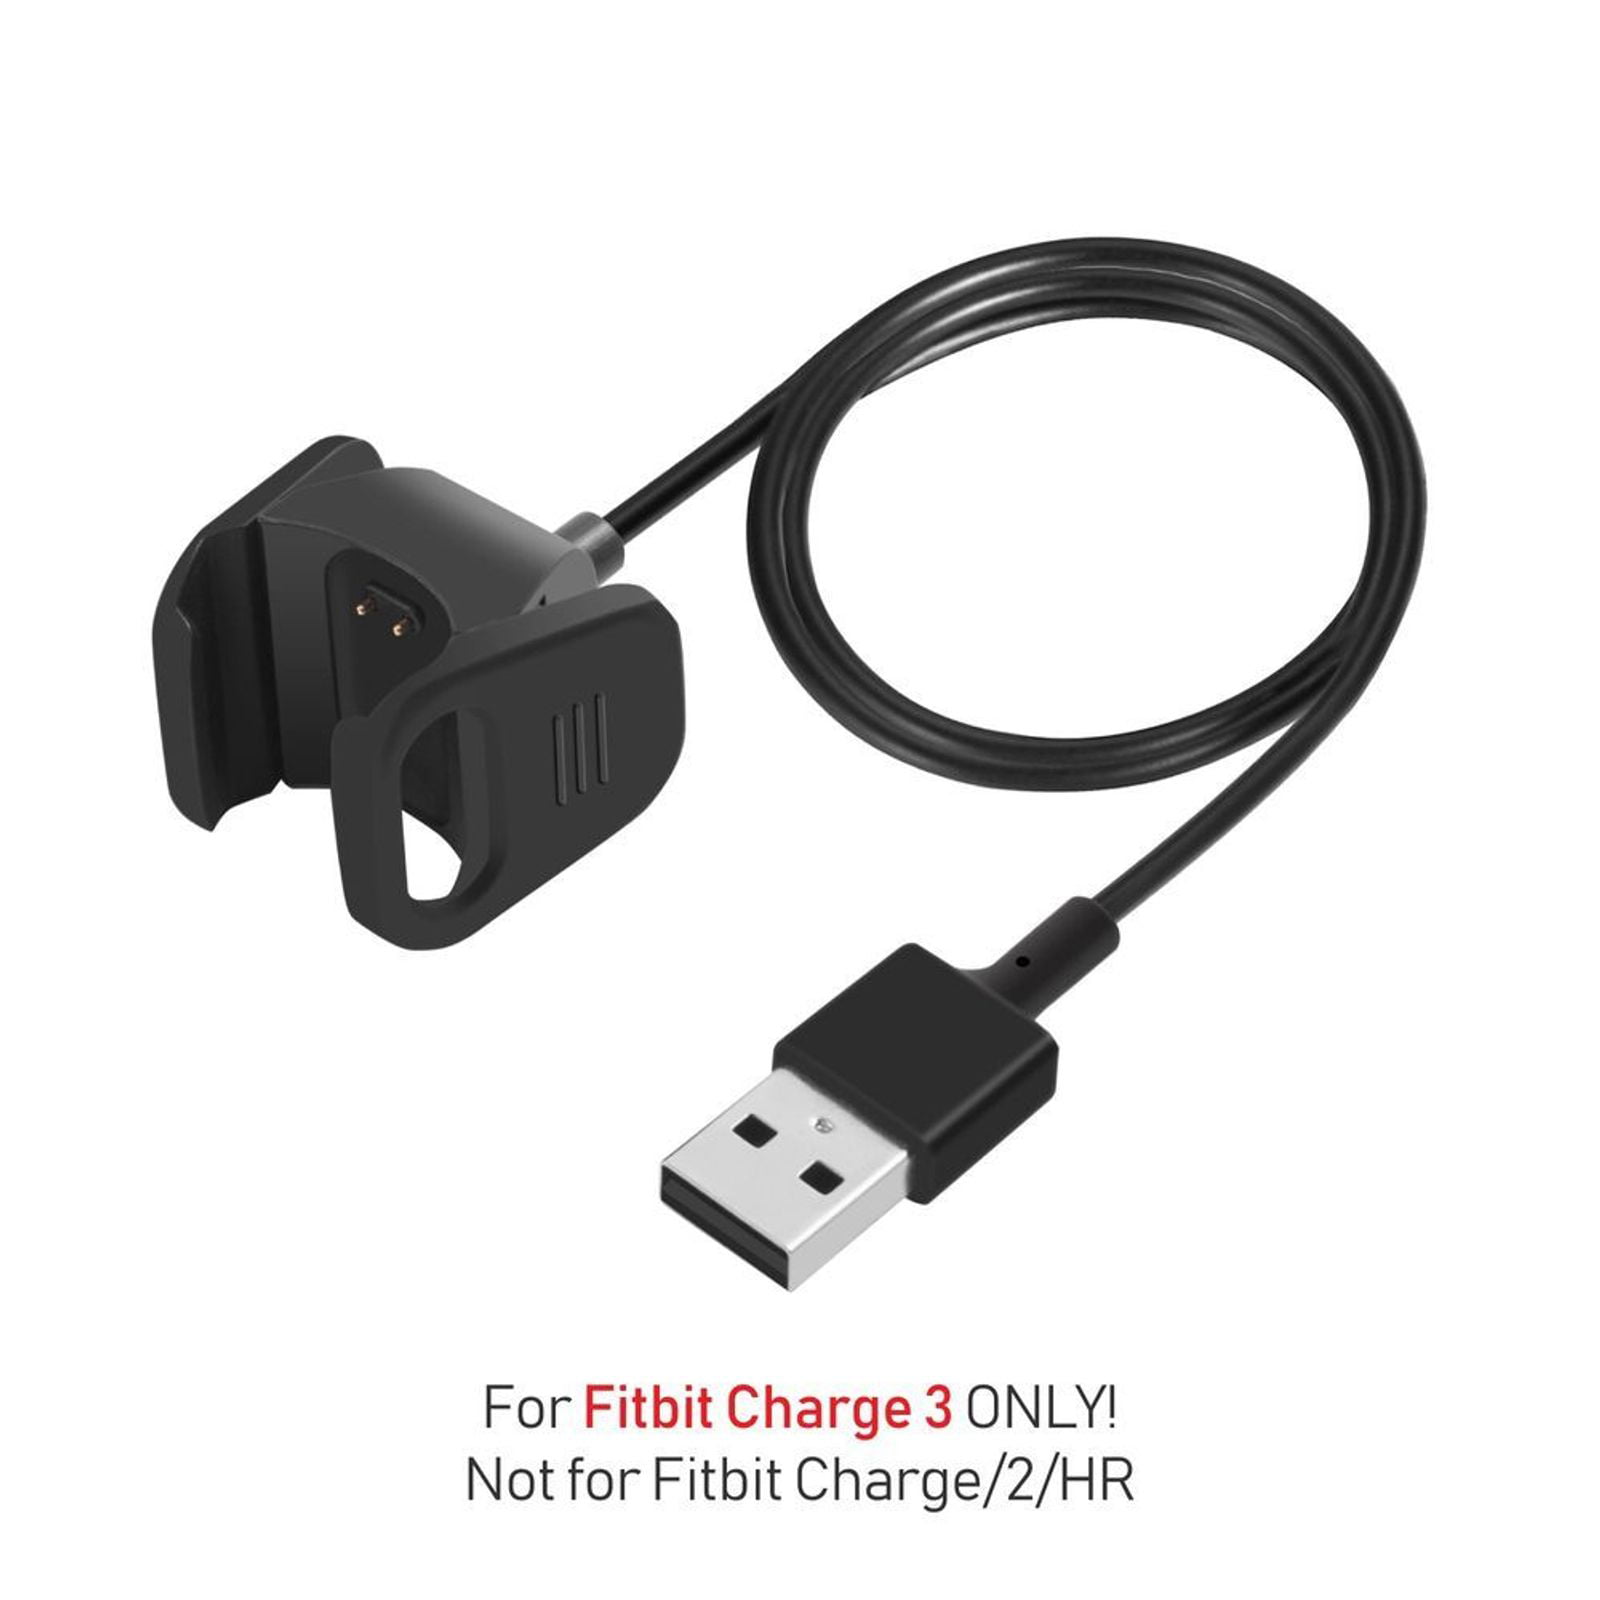 USB Charging Charger Cable Cord For Fitbit Charge 3 Fitness Activity Tracker New 